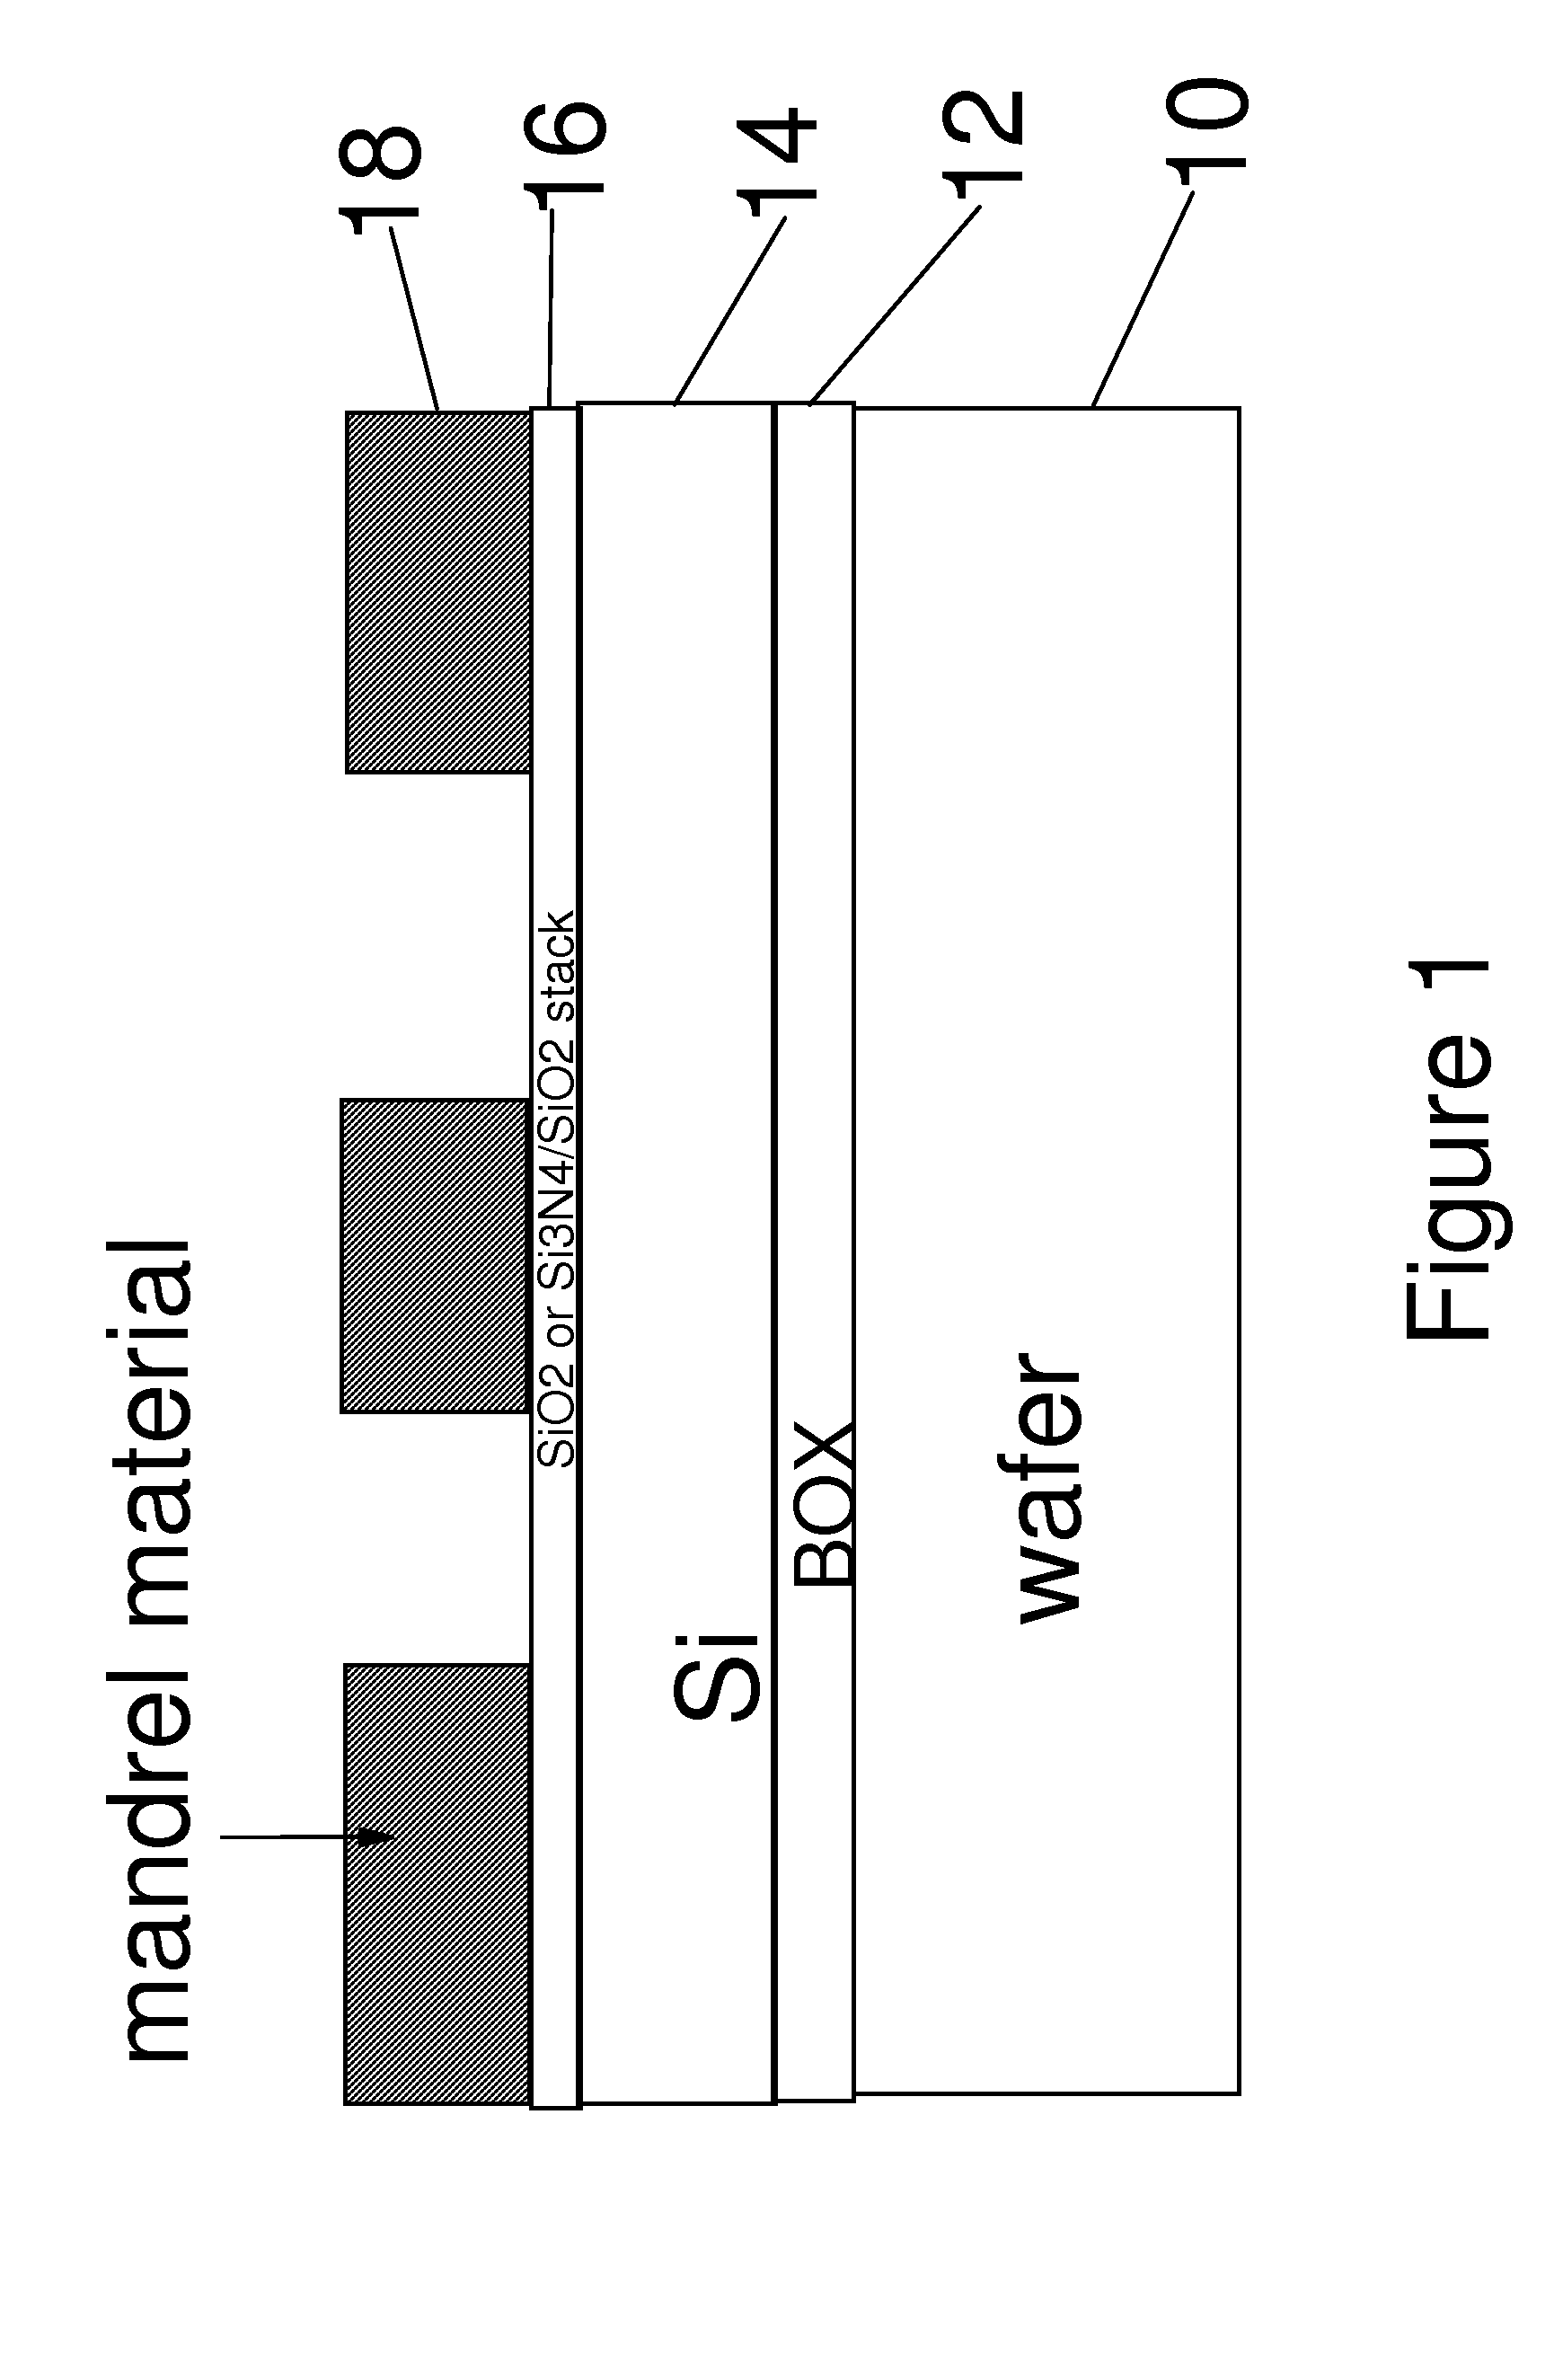 Multiple-gate device with floating back gate